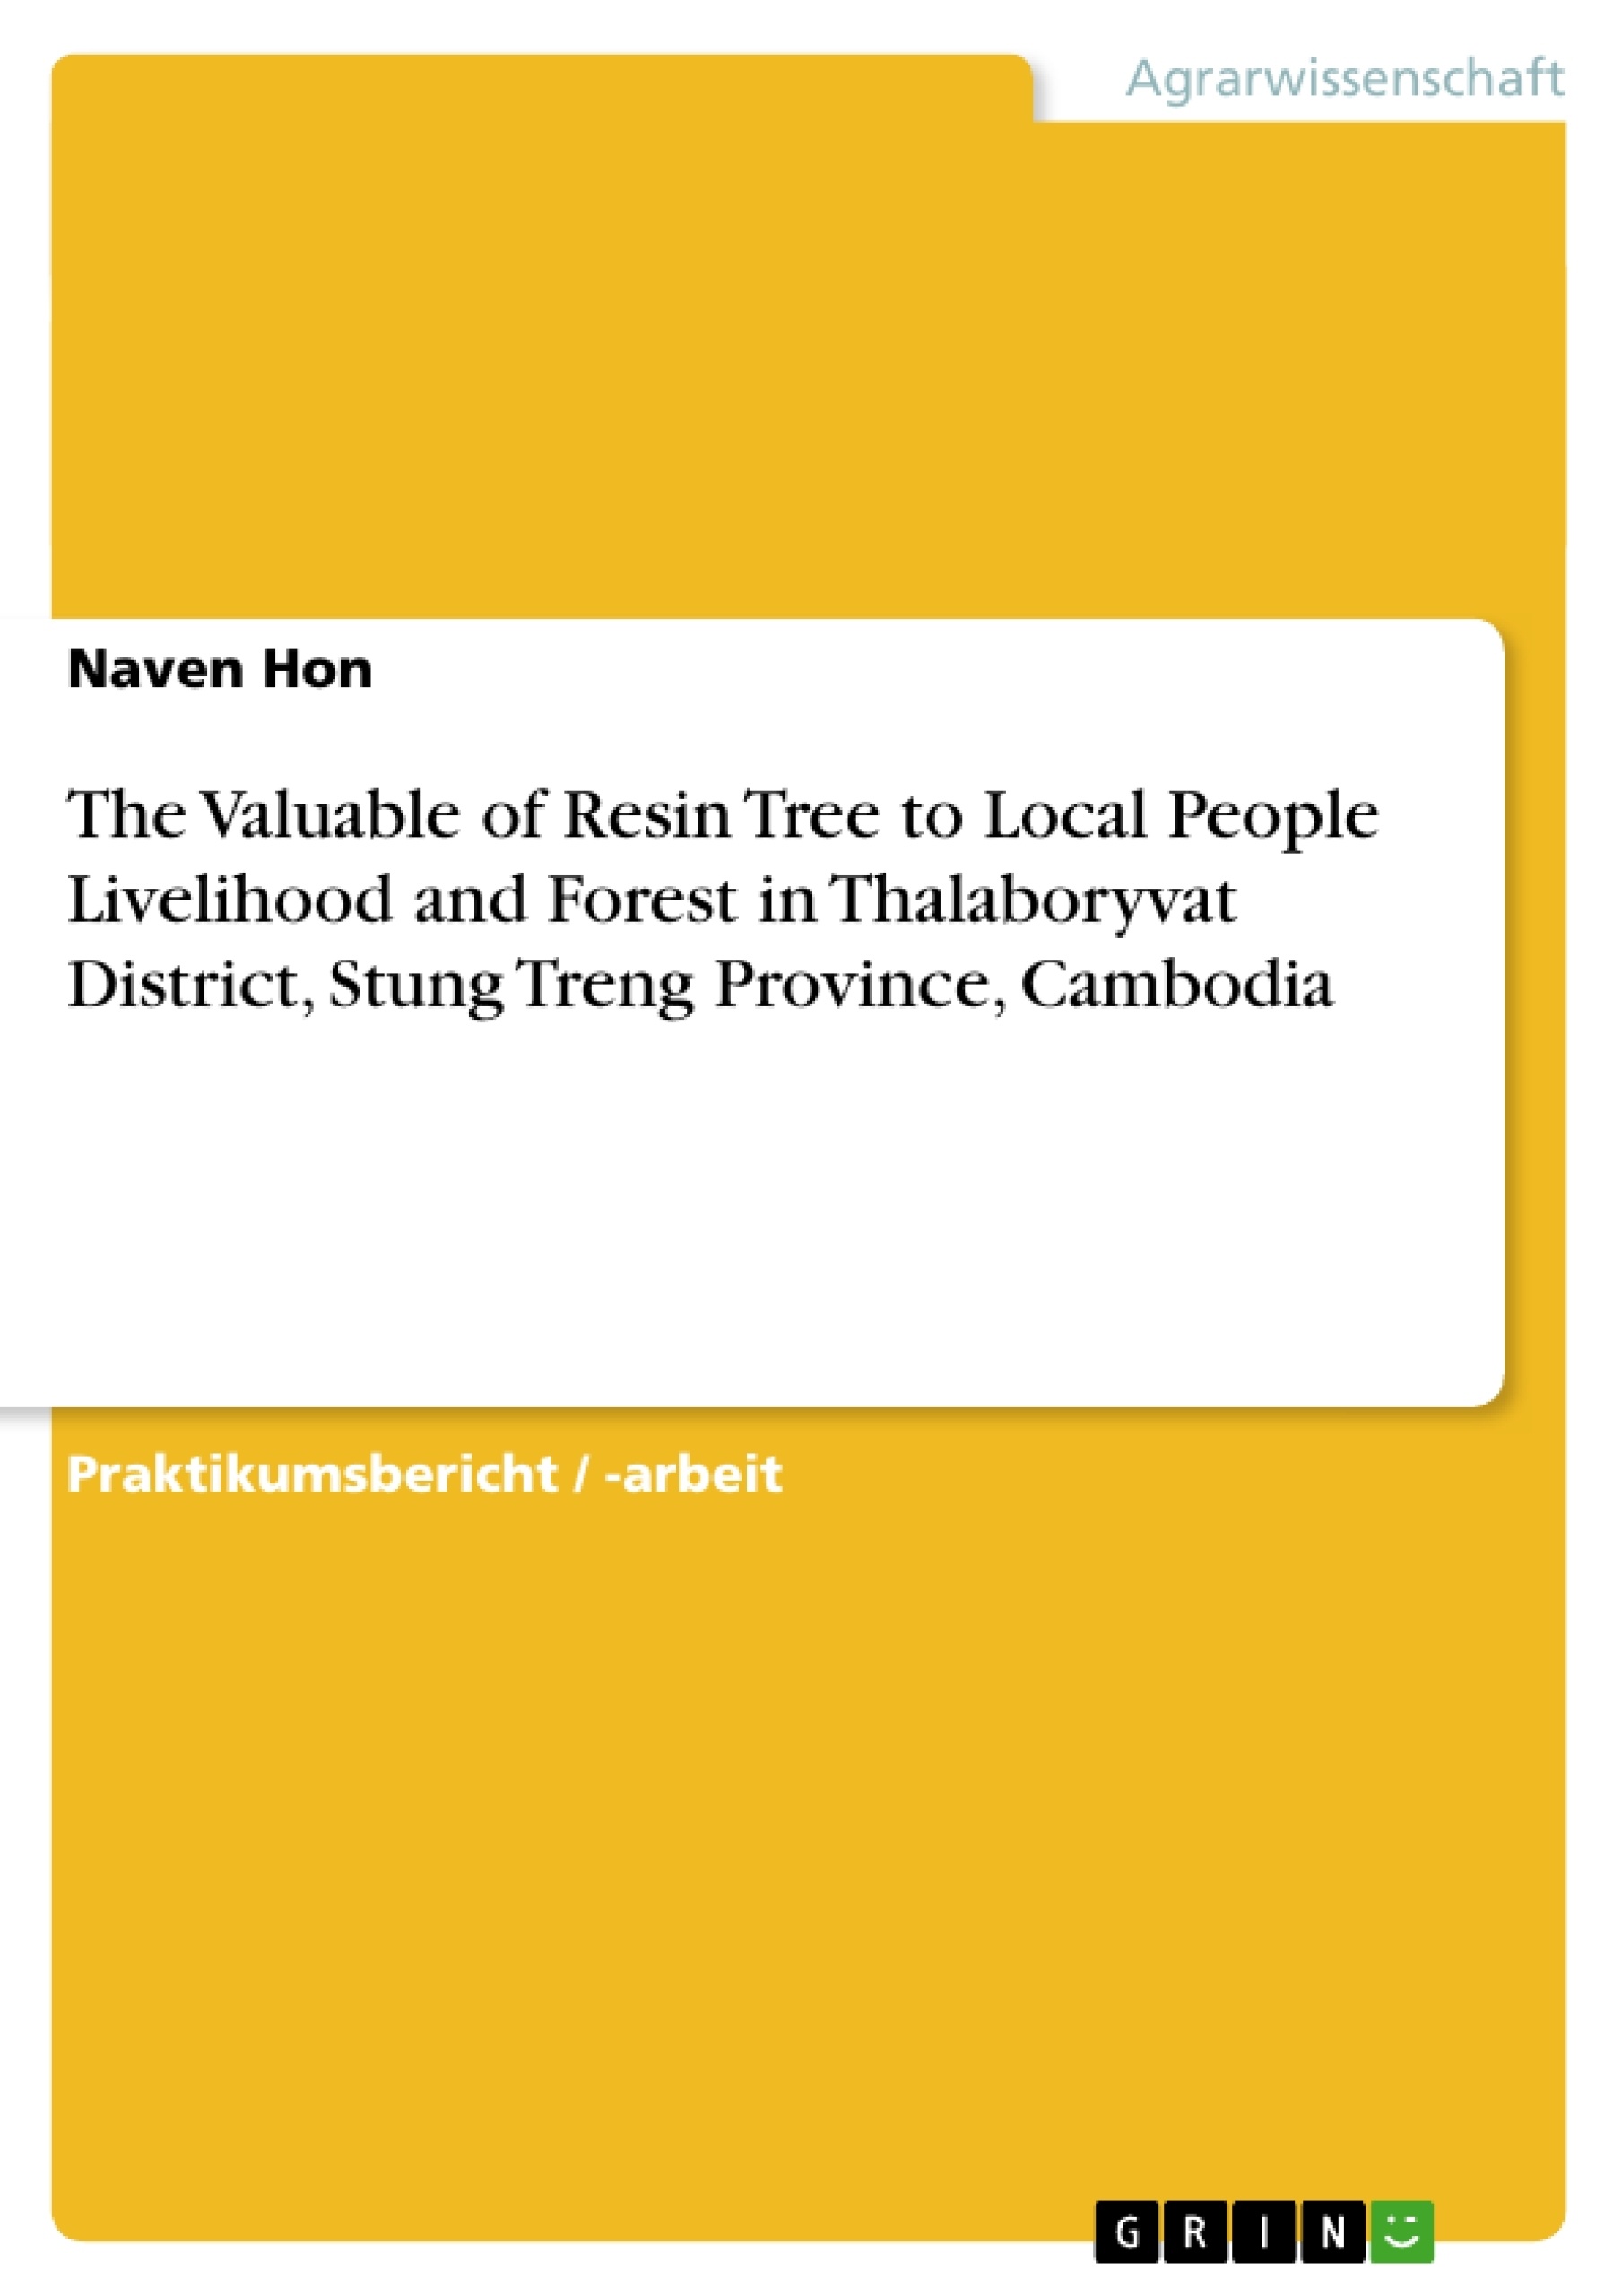 Titel: The Valuable of Resin Tree to Local People Livelihood and Forest in Thalaboryvat District, Stung Treng Province, Cambodia